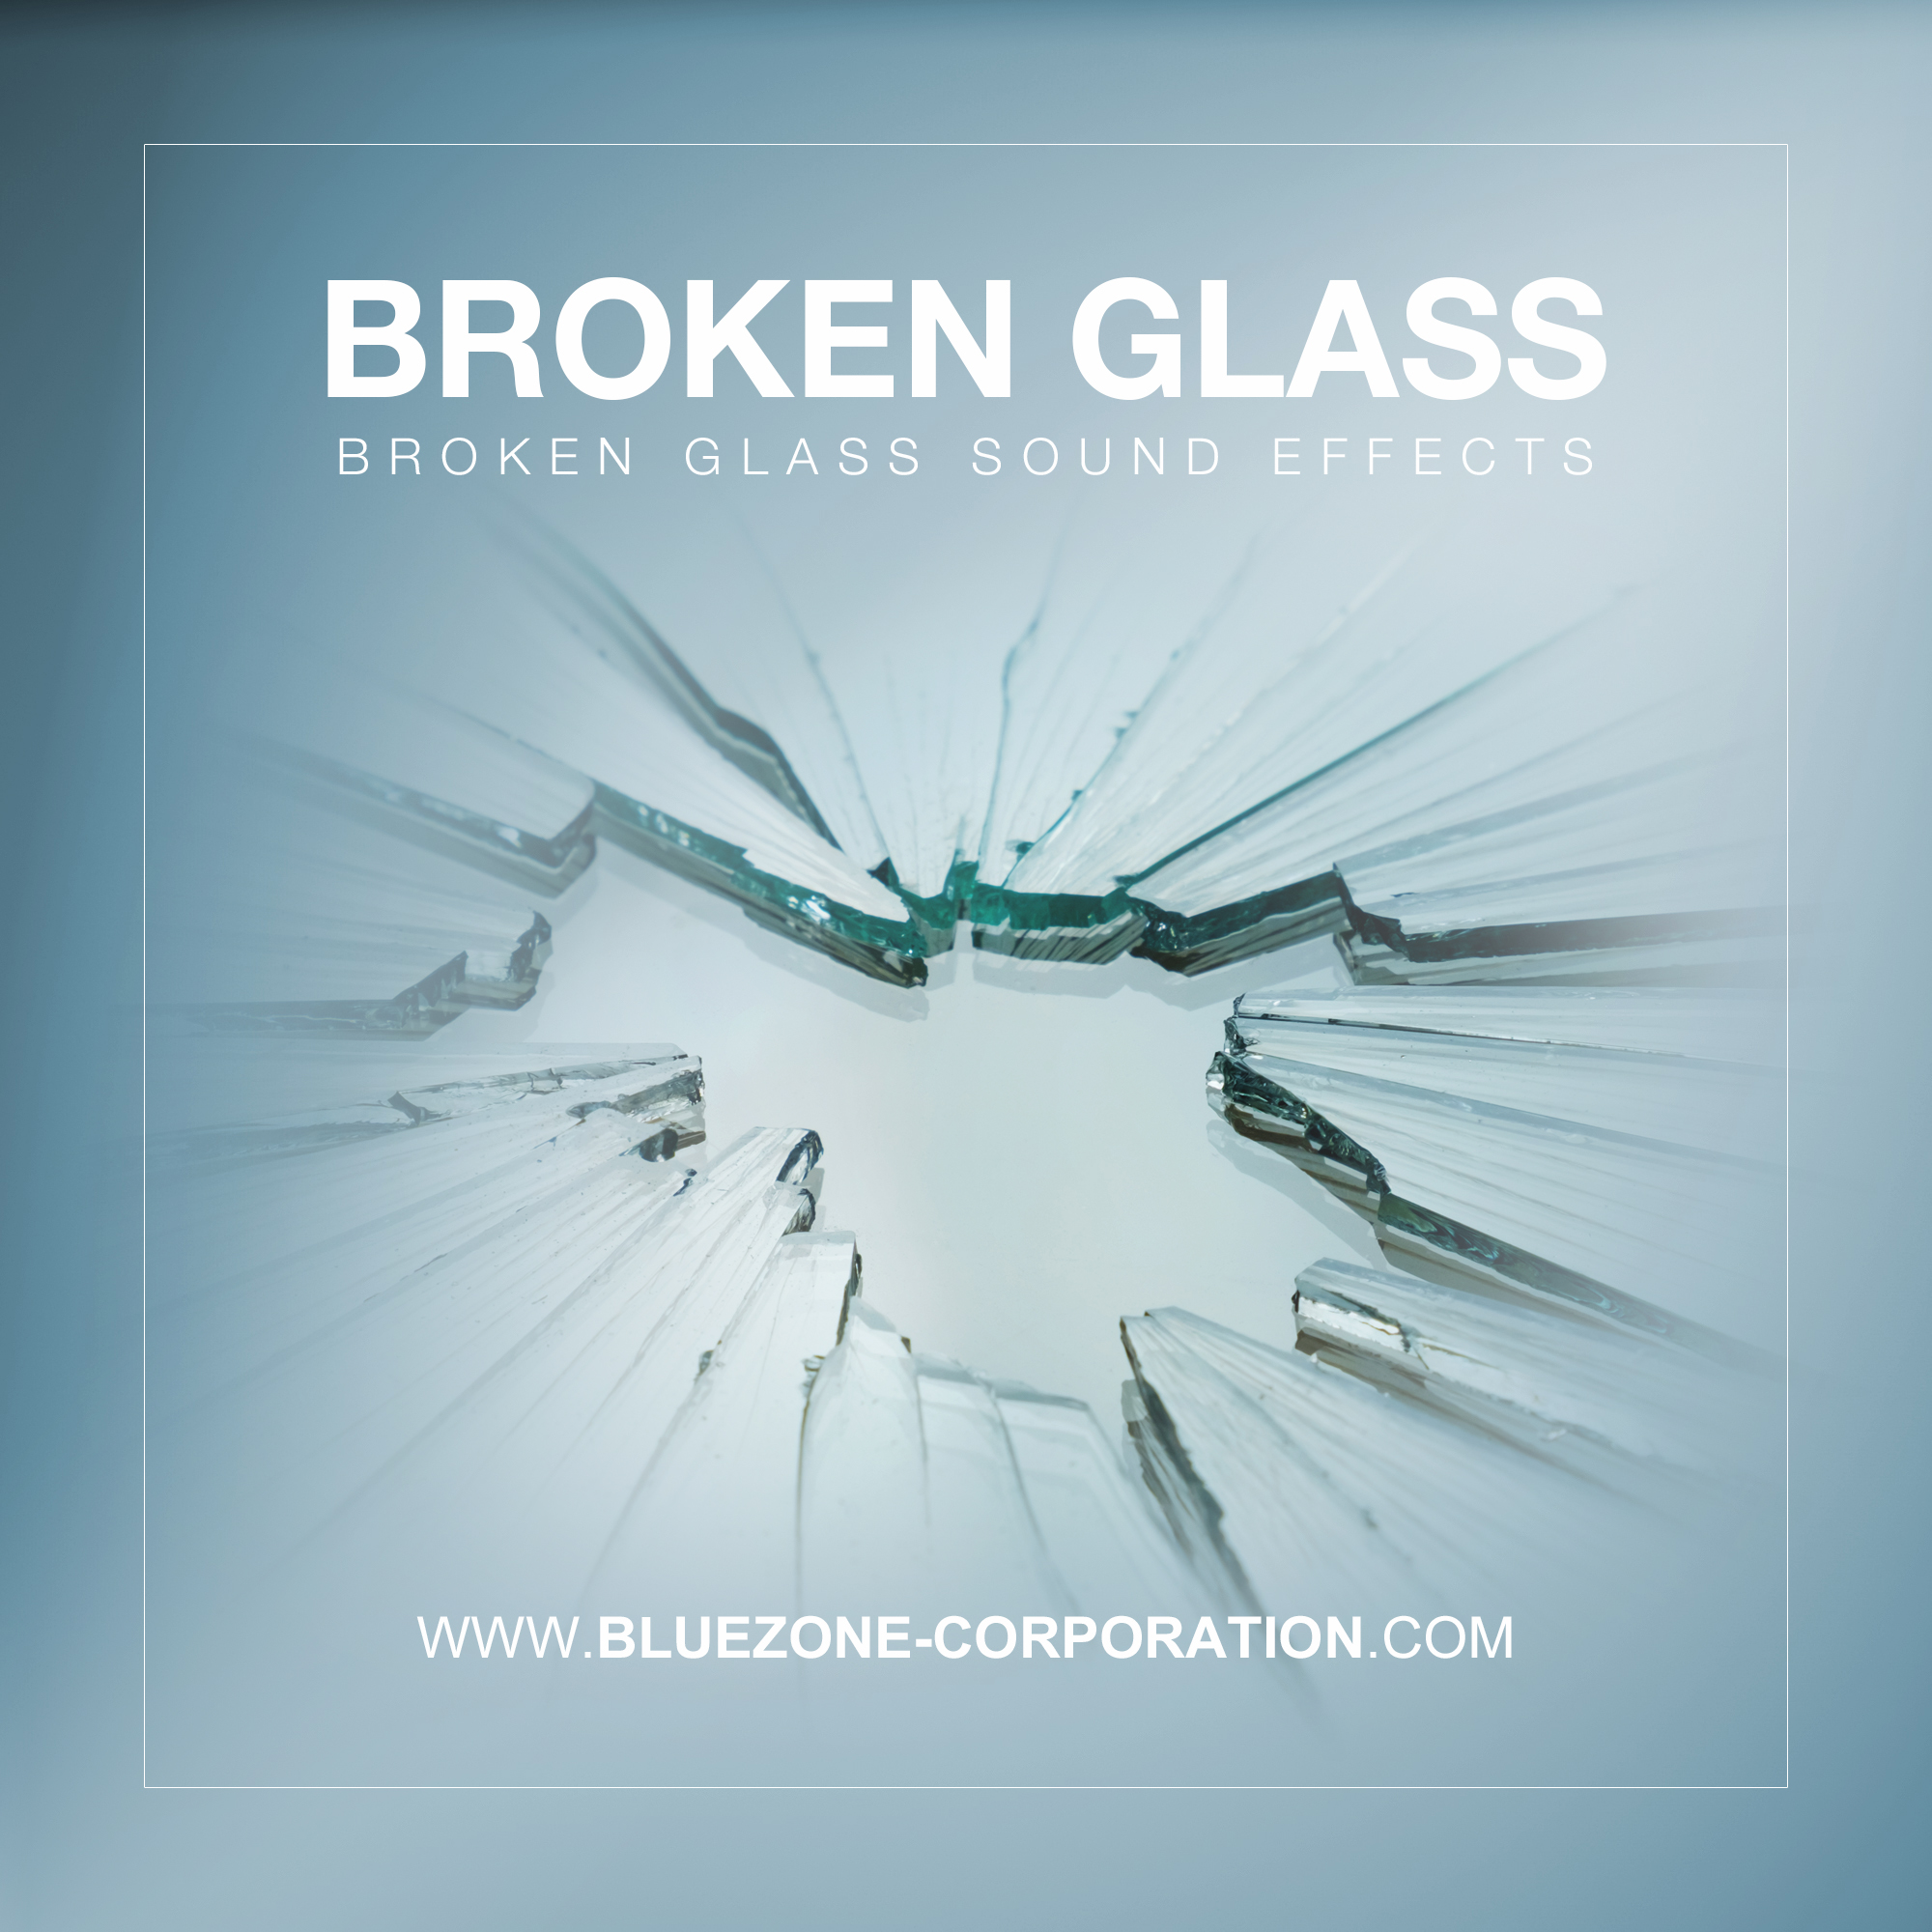 Broken Glass Sound Effects Released - Bluezone Corporation